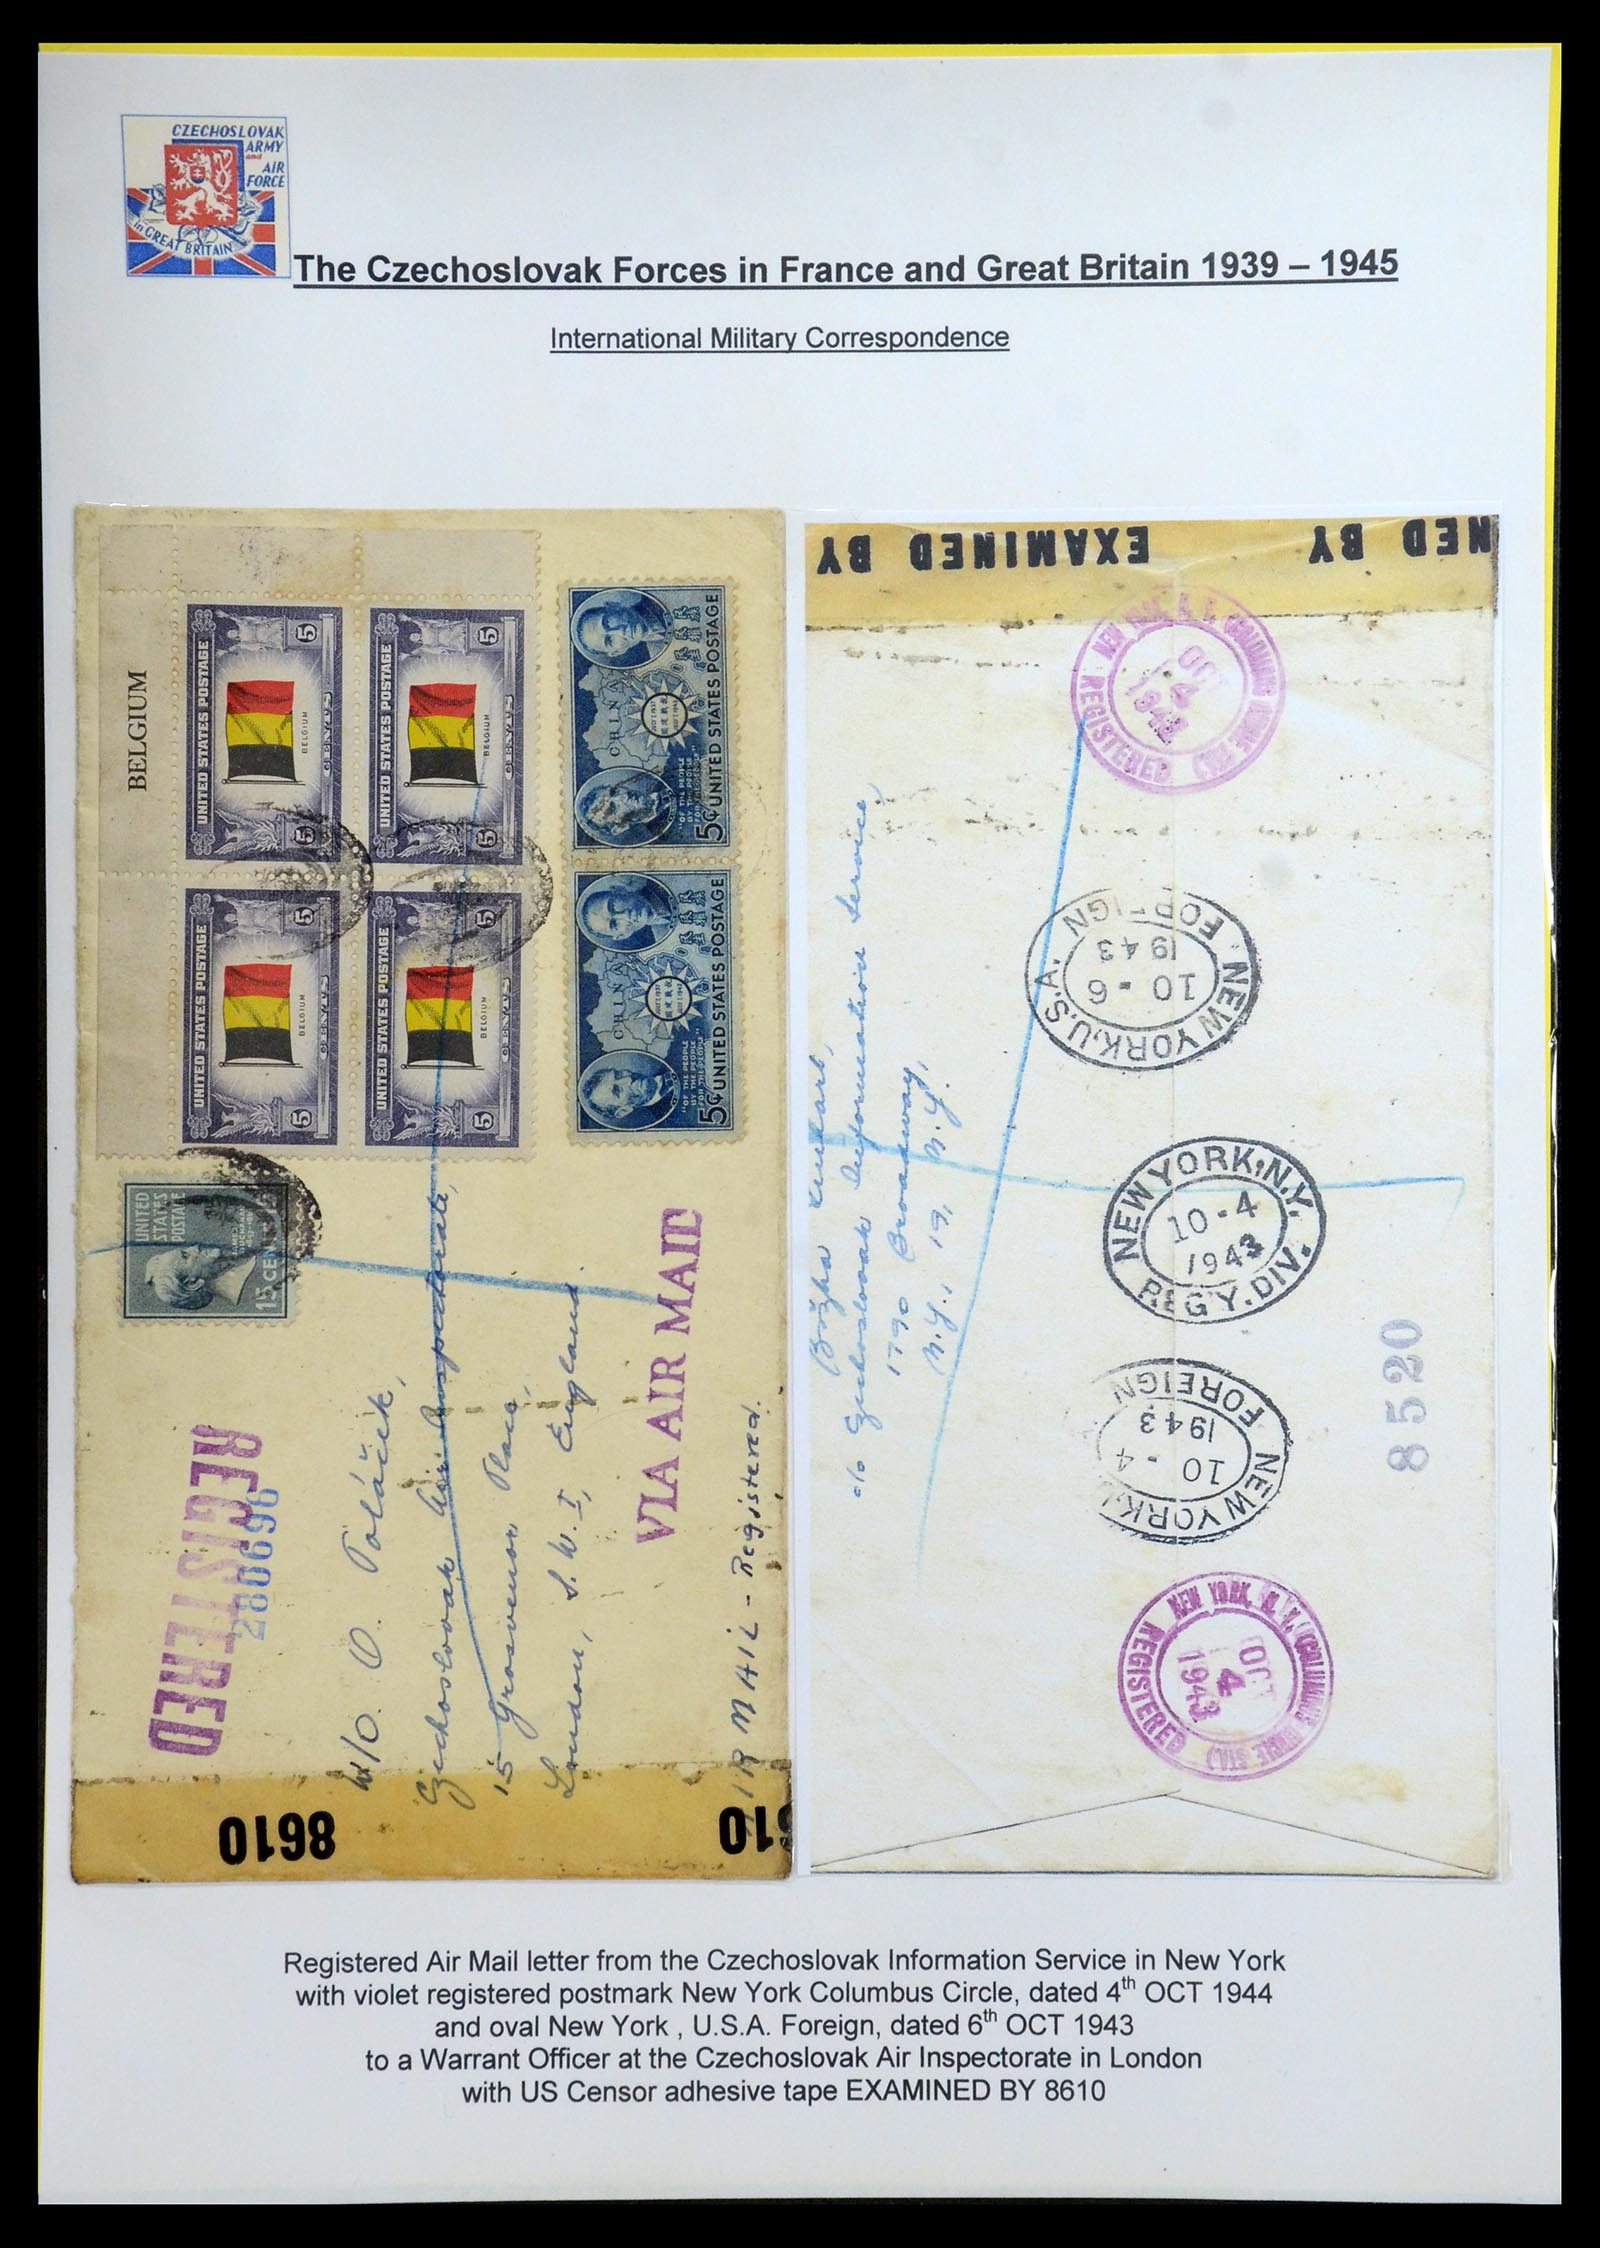 35574 146 - Stamp Collection 35574 Czechoslovak forces in France and Great Britain 1